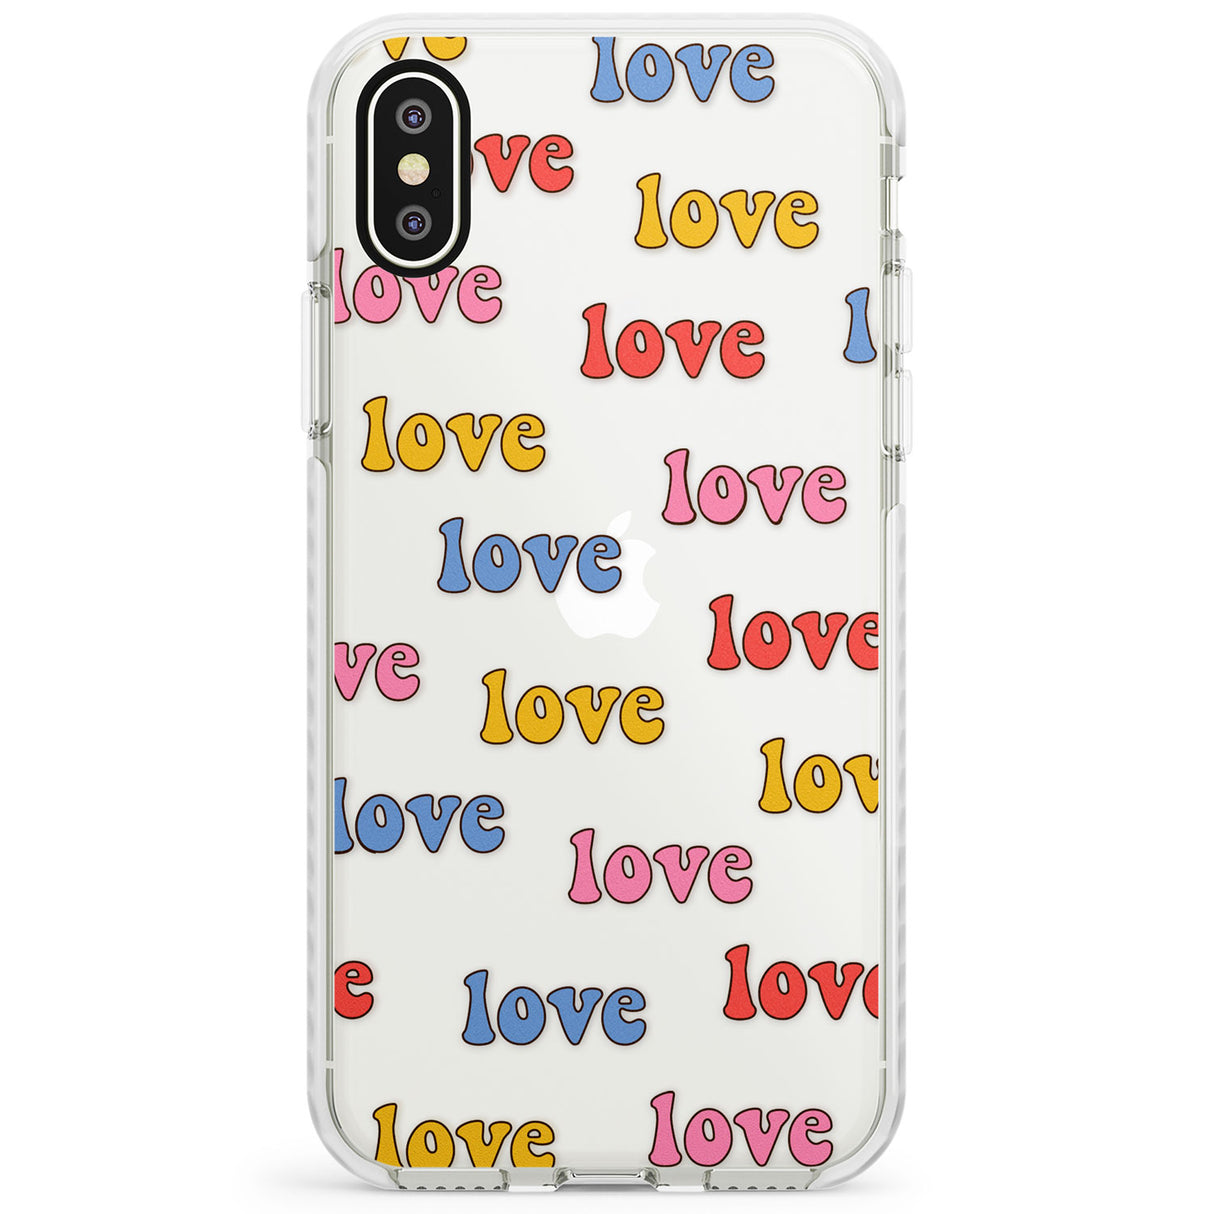 Love Pattern Impact Phone Case for iPhone X XS Max XR